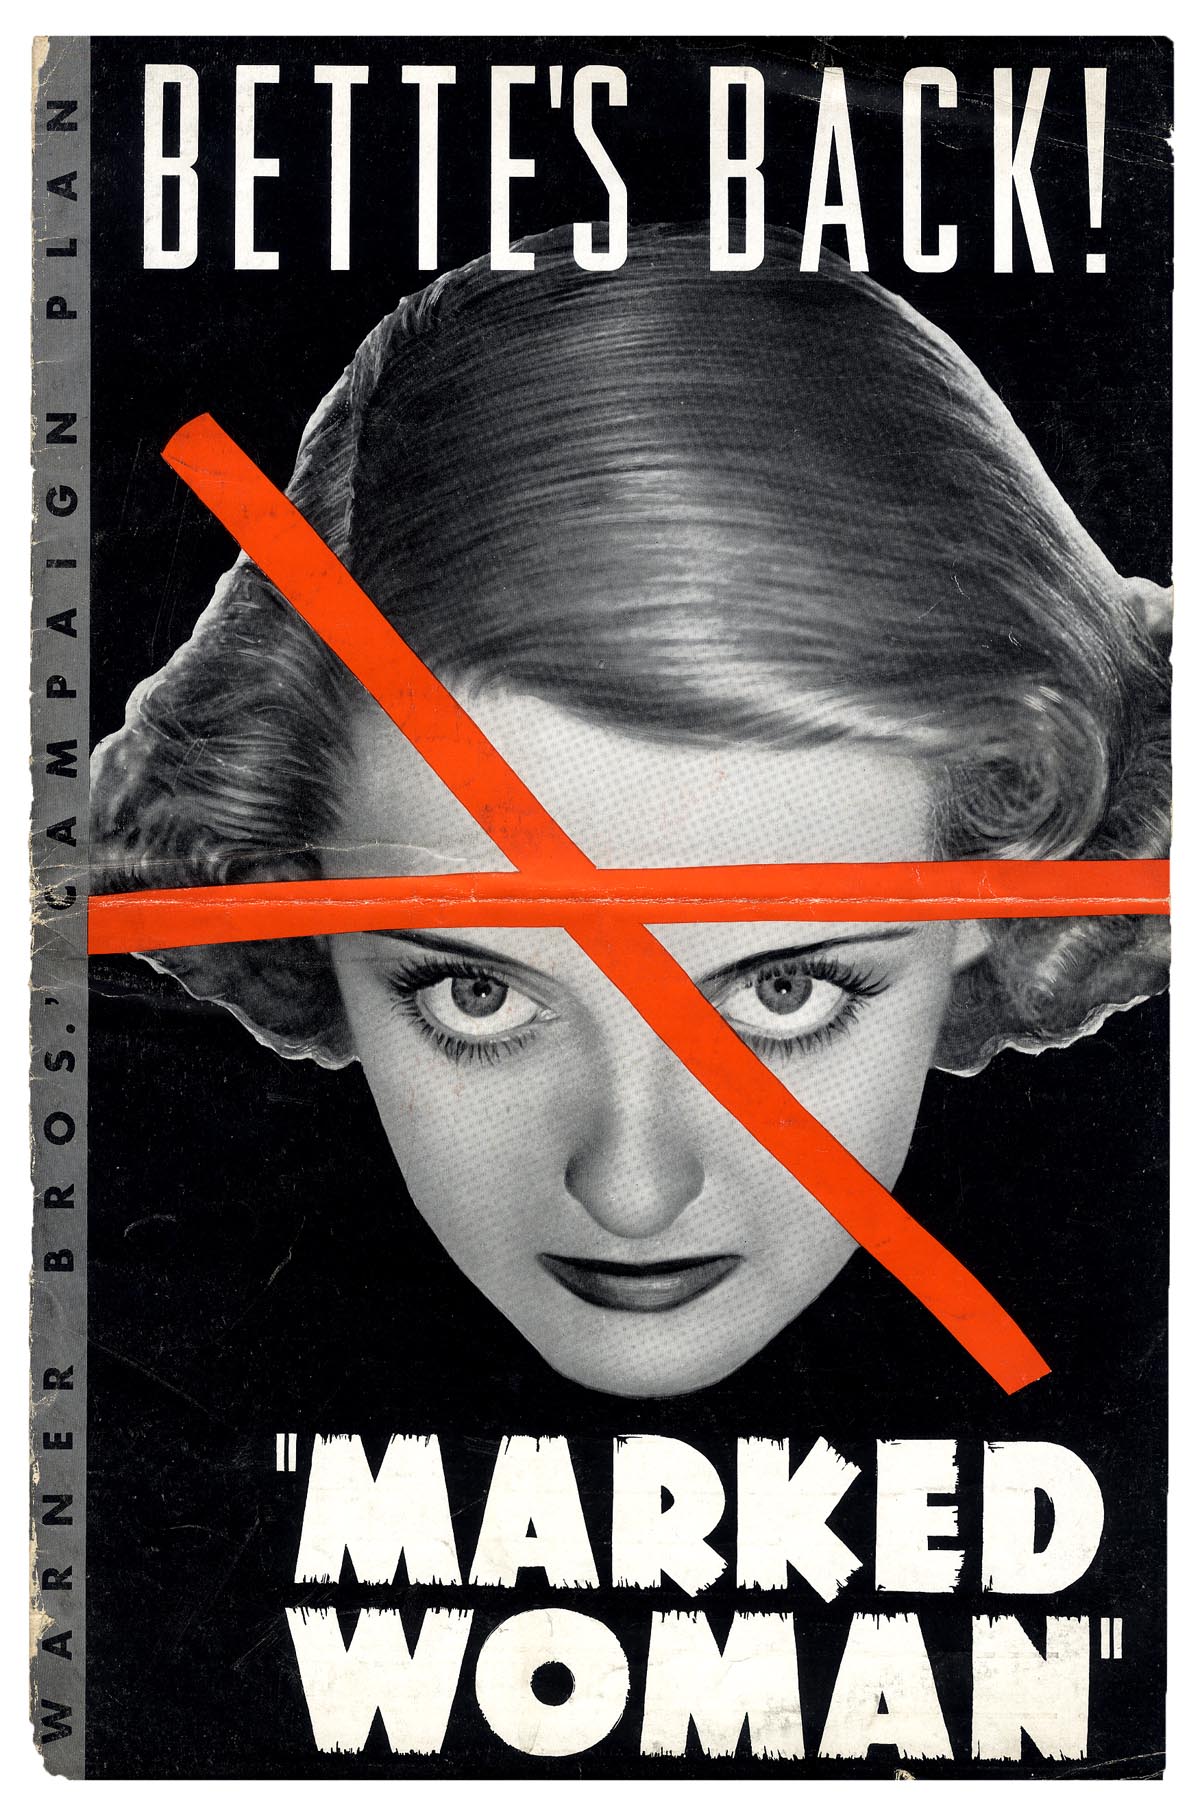 Marked back. Marked woman, 1937. Bette Davis in Sunglasses. Marked.